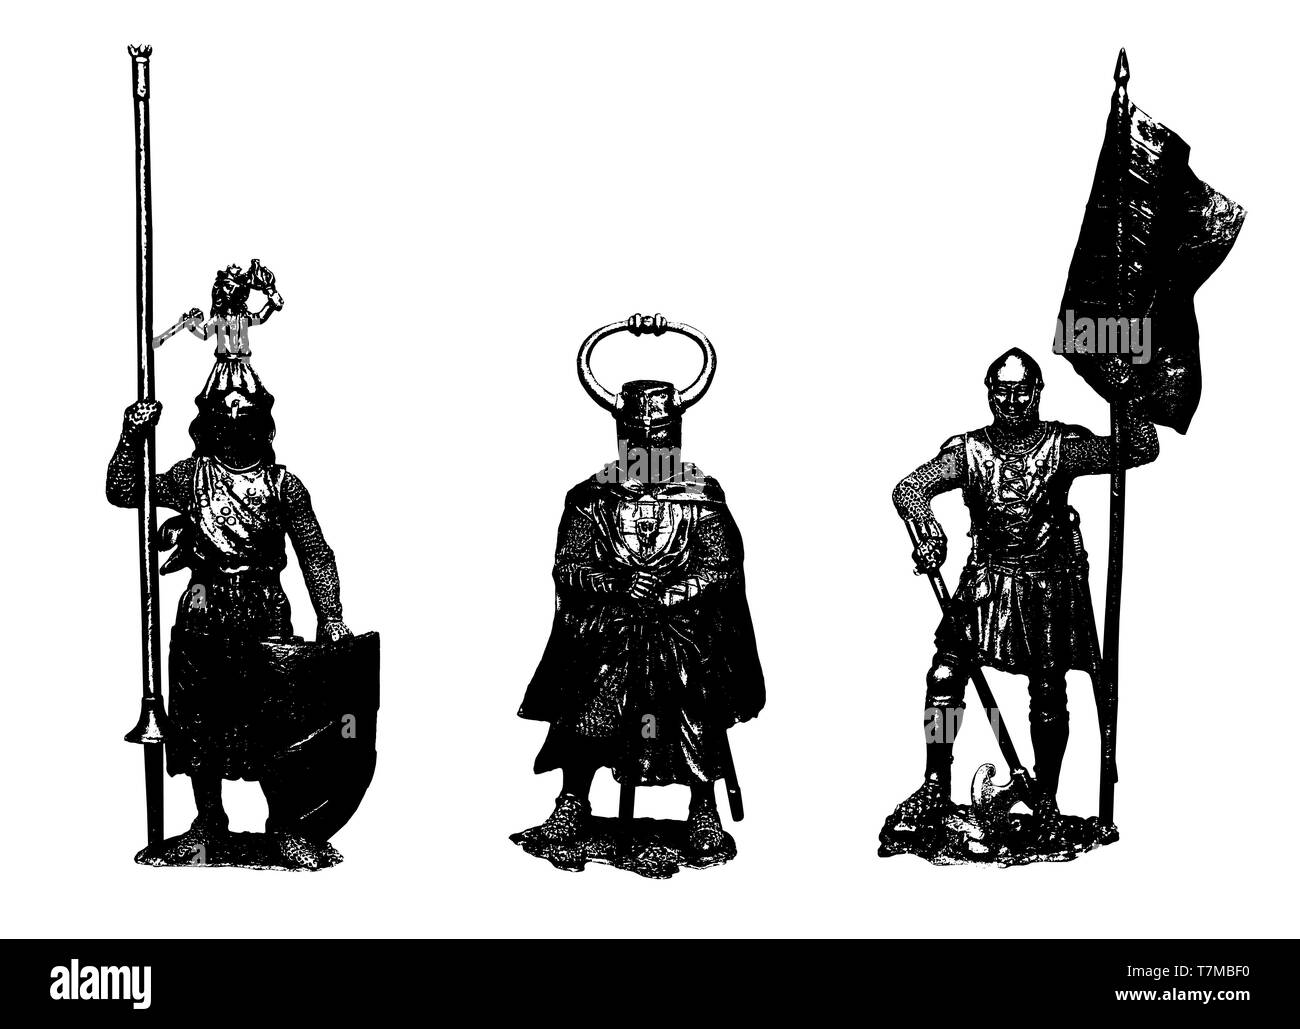 Medieval knights illustration. Set of 3 knights. Black and white drawing. Stock Photo